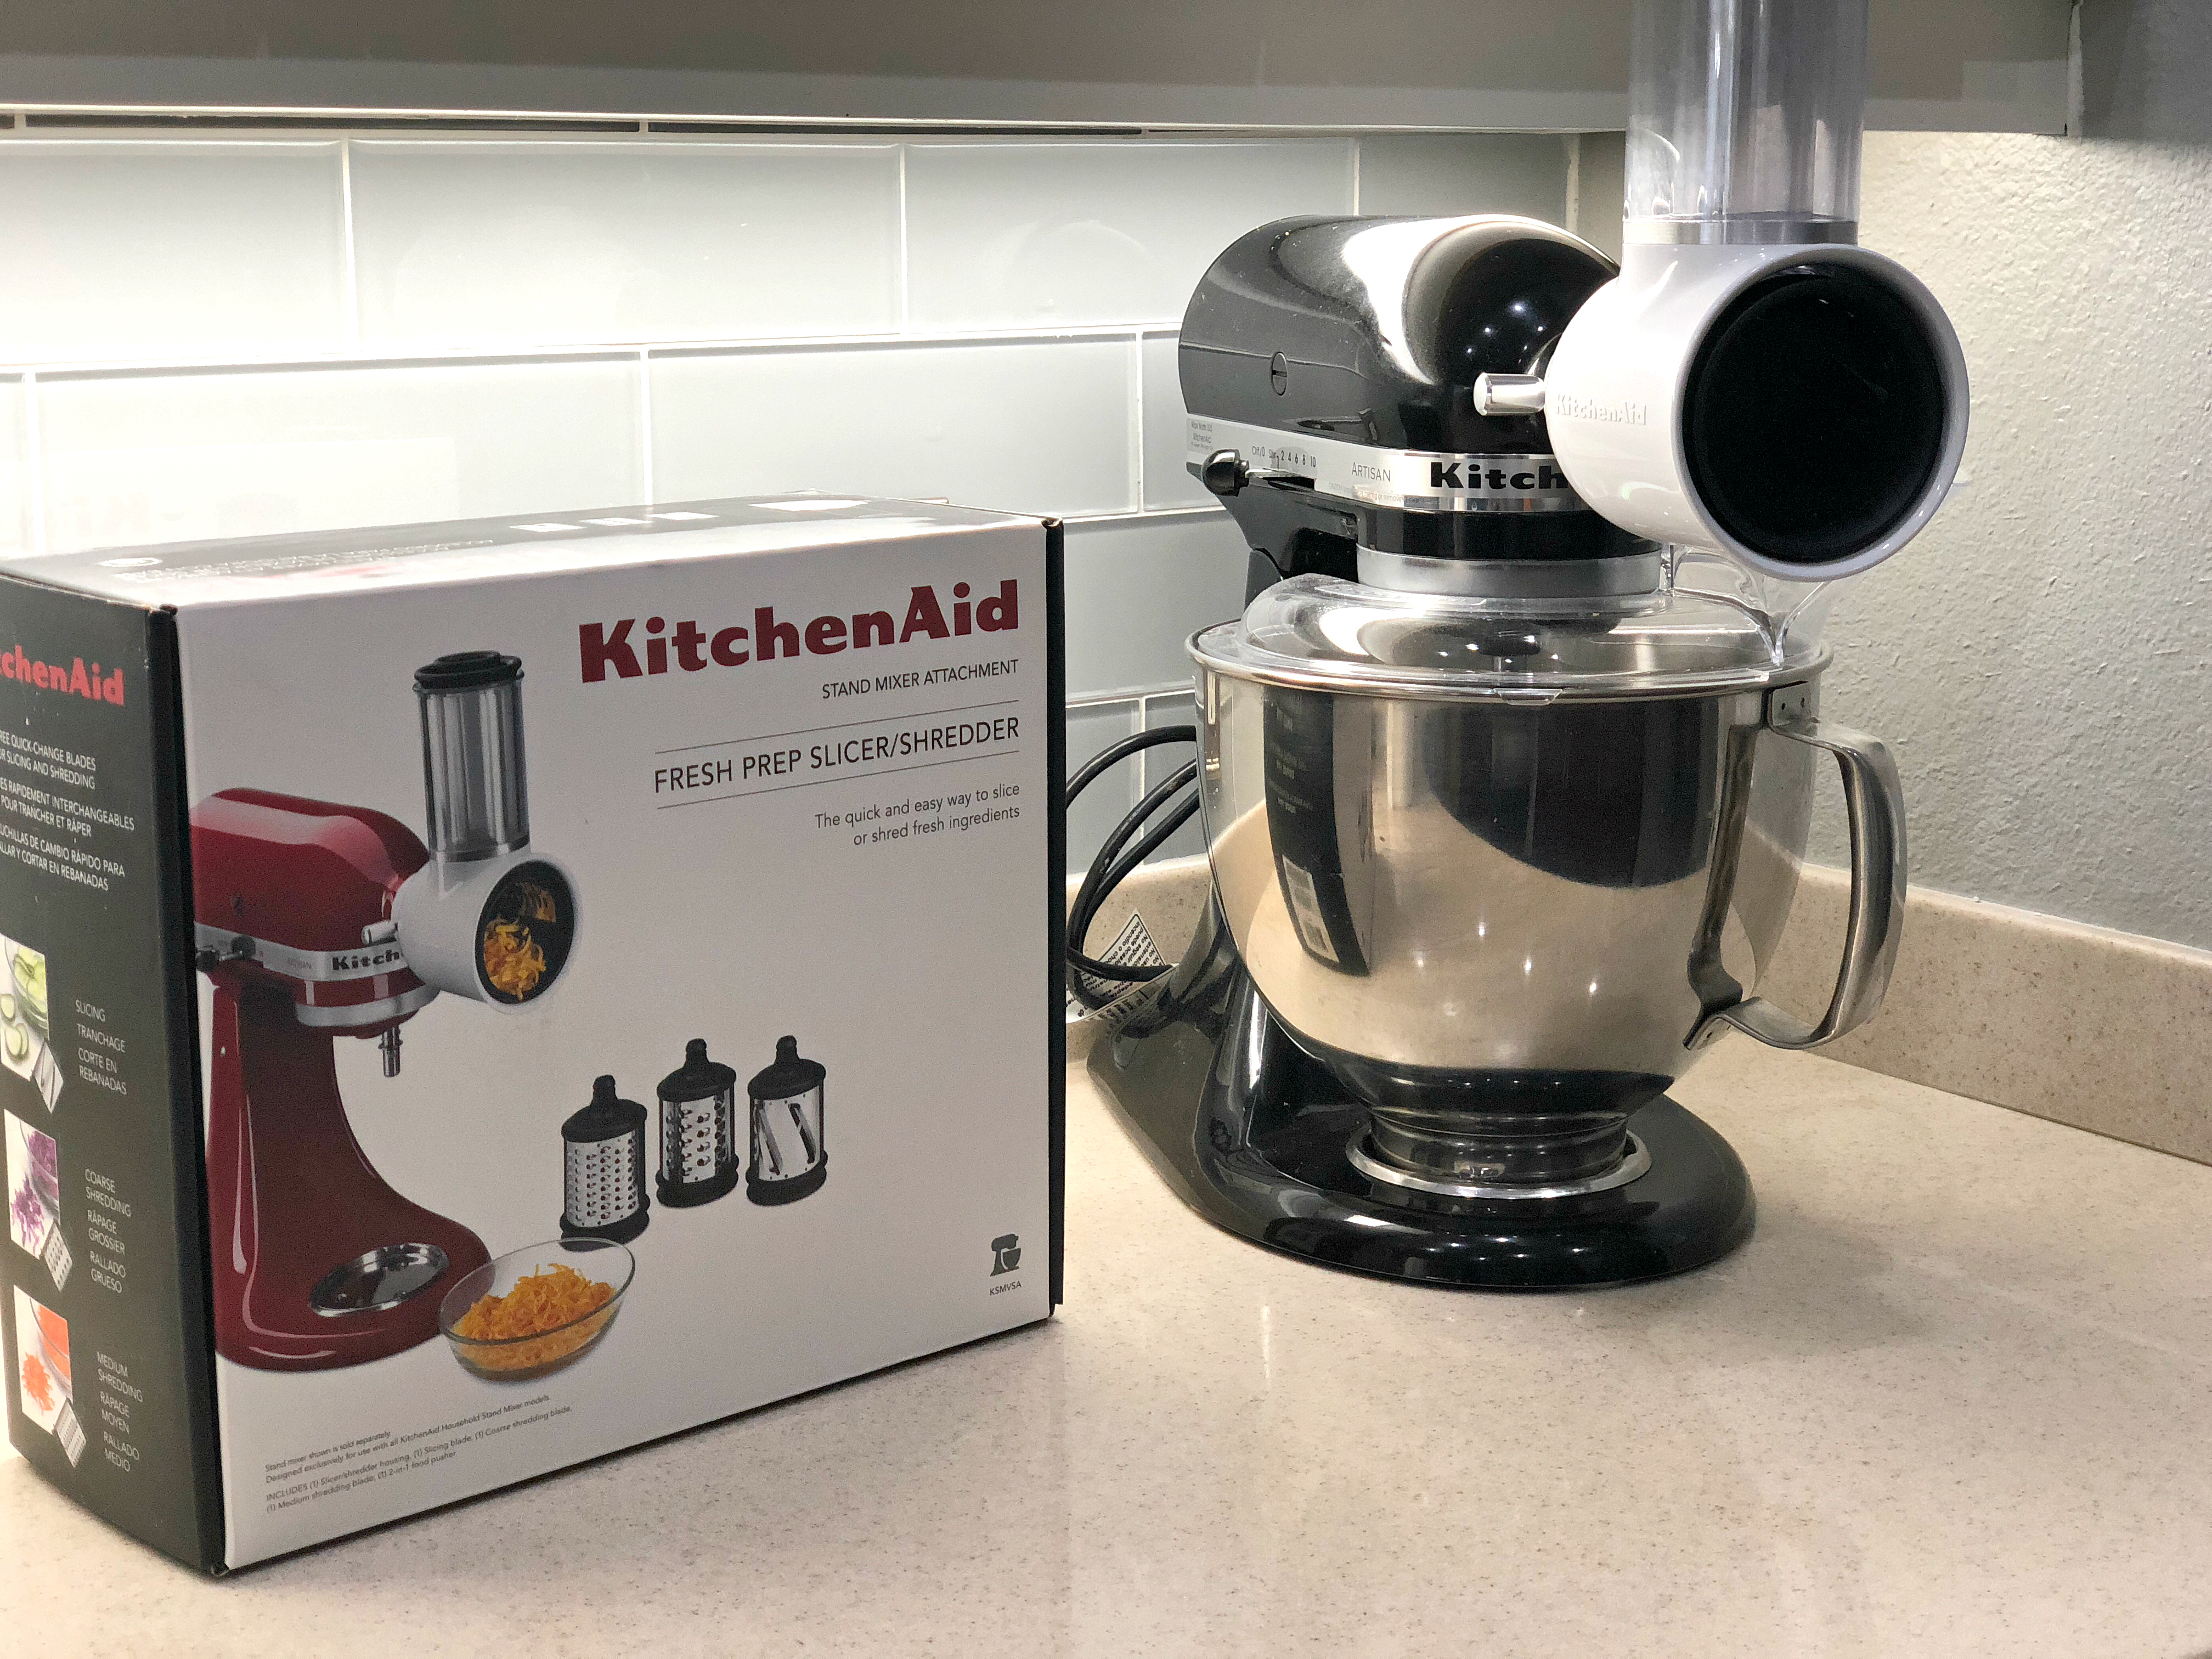 This KitchenAid slicer and shredder attachment pictured next to the box is awesome for the keto diet and saves money